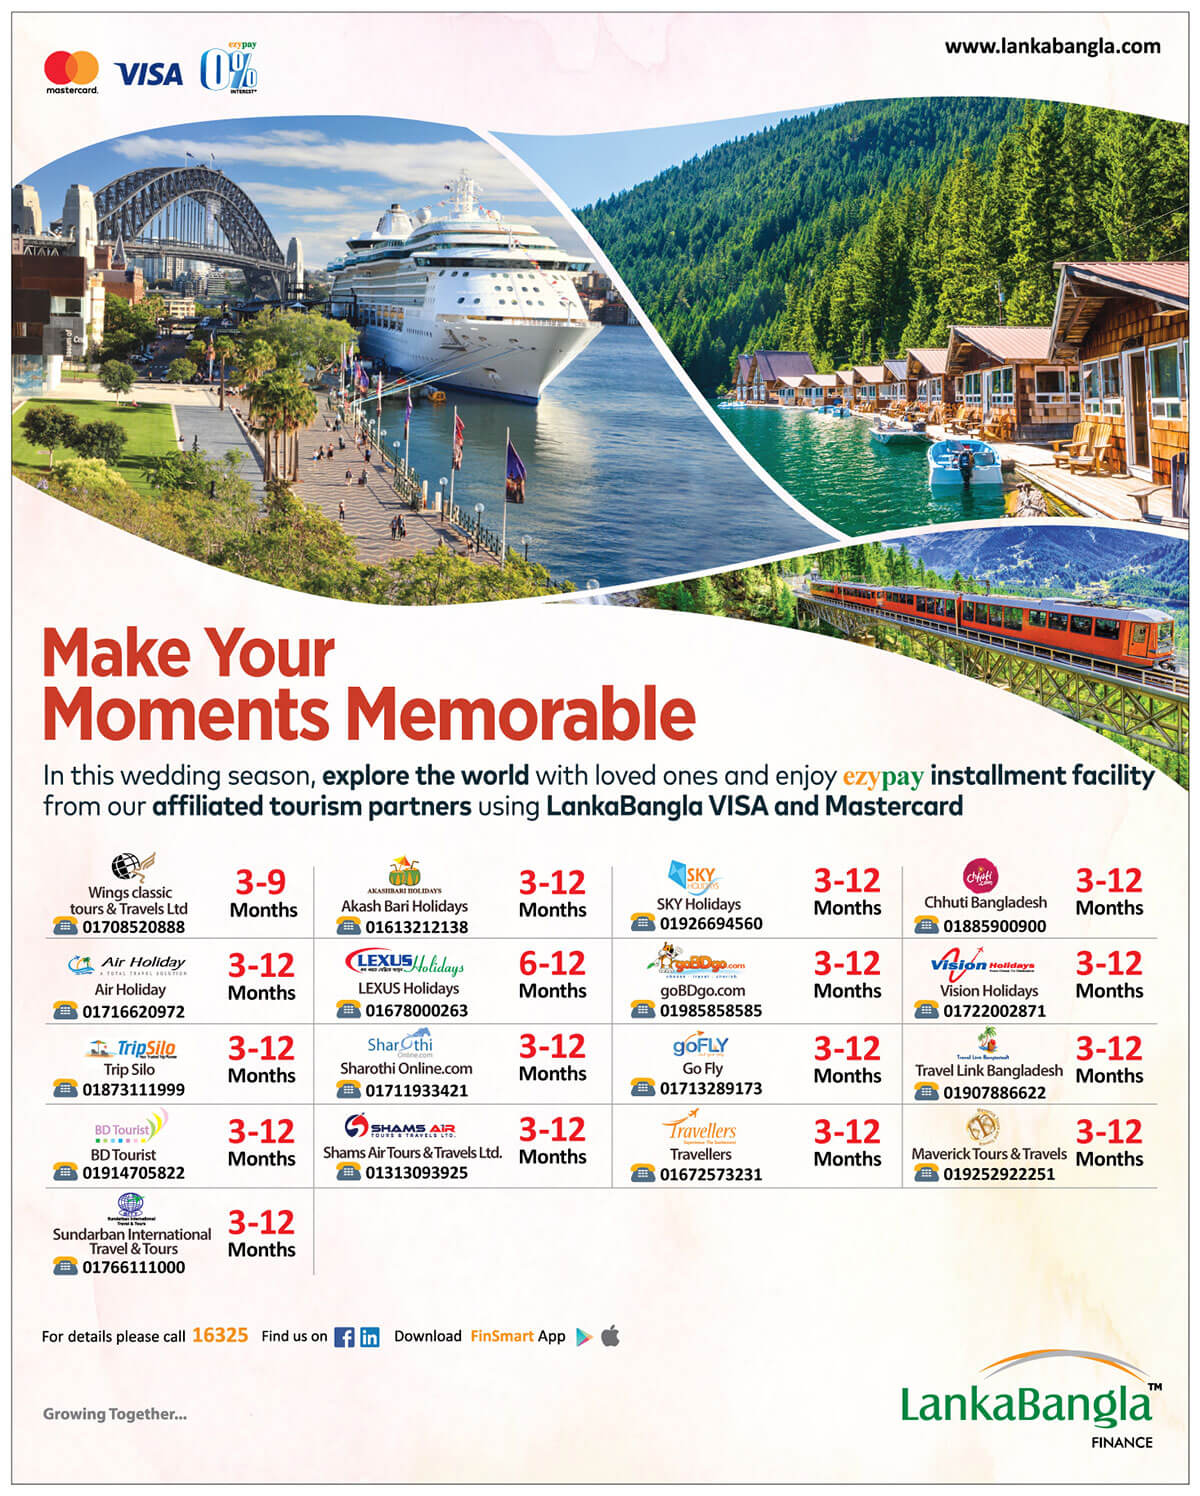 Make Your Moments Memorable – Enjoy ezypay Installment Facility From our affiliated tourism partners